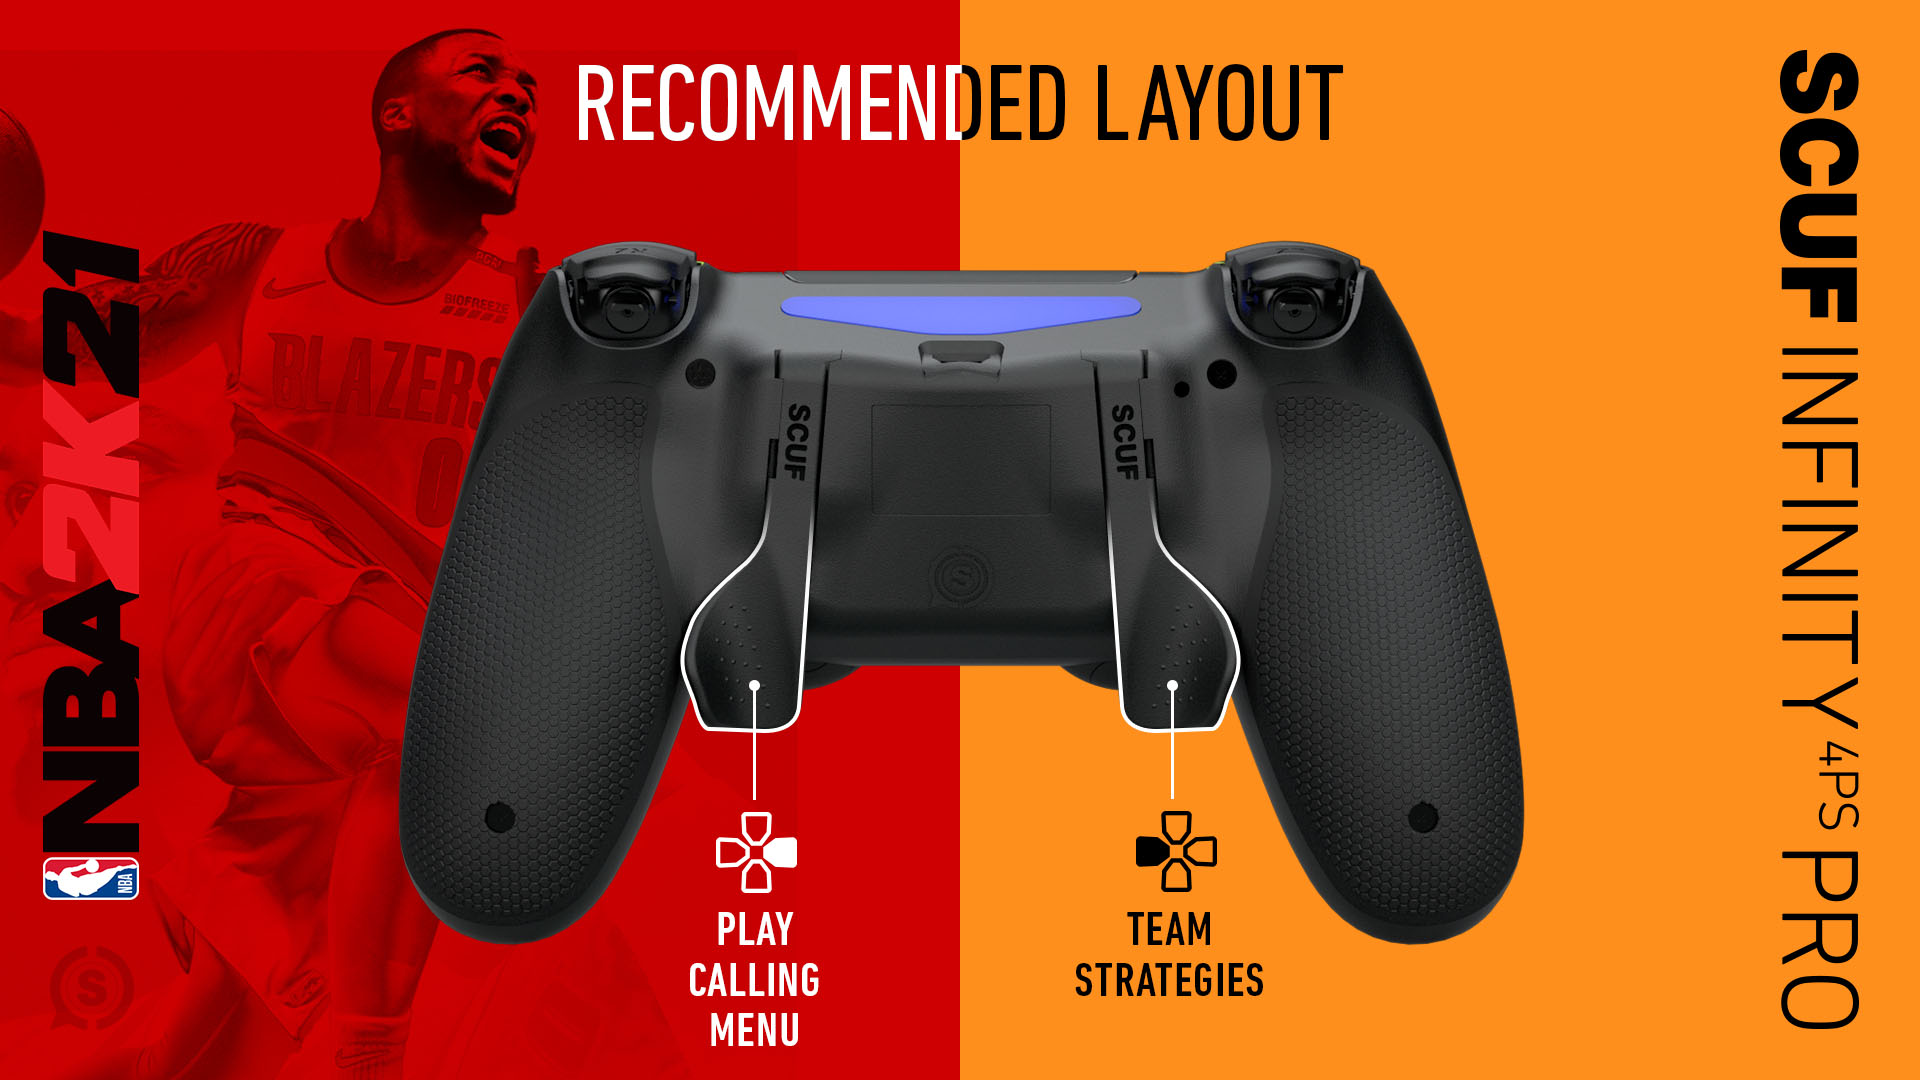 PS4-Controller „SCUF Infinity4PSPro“ bei NBA2K21